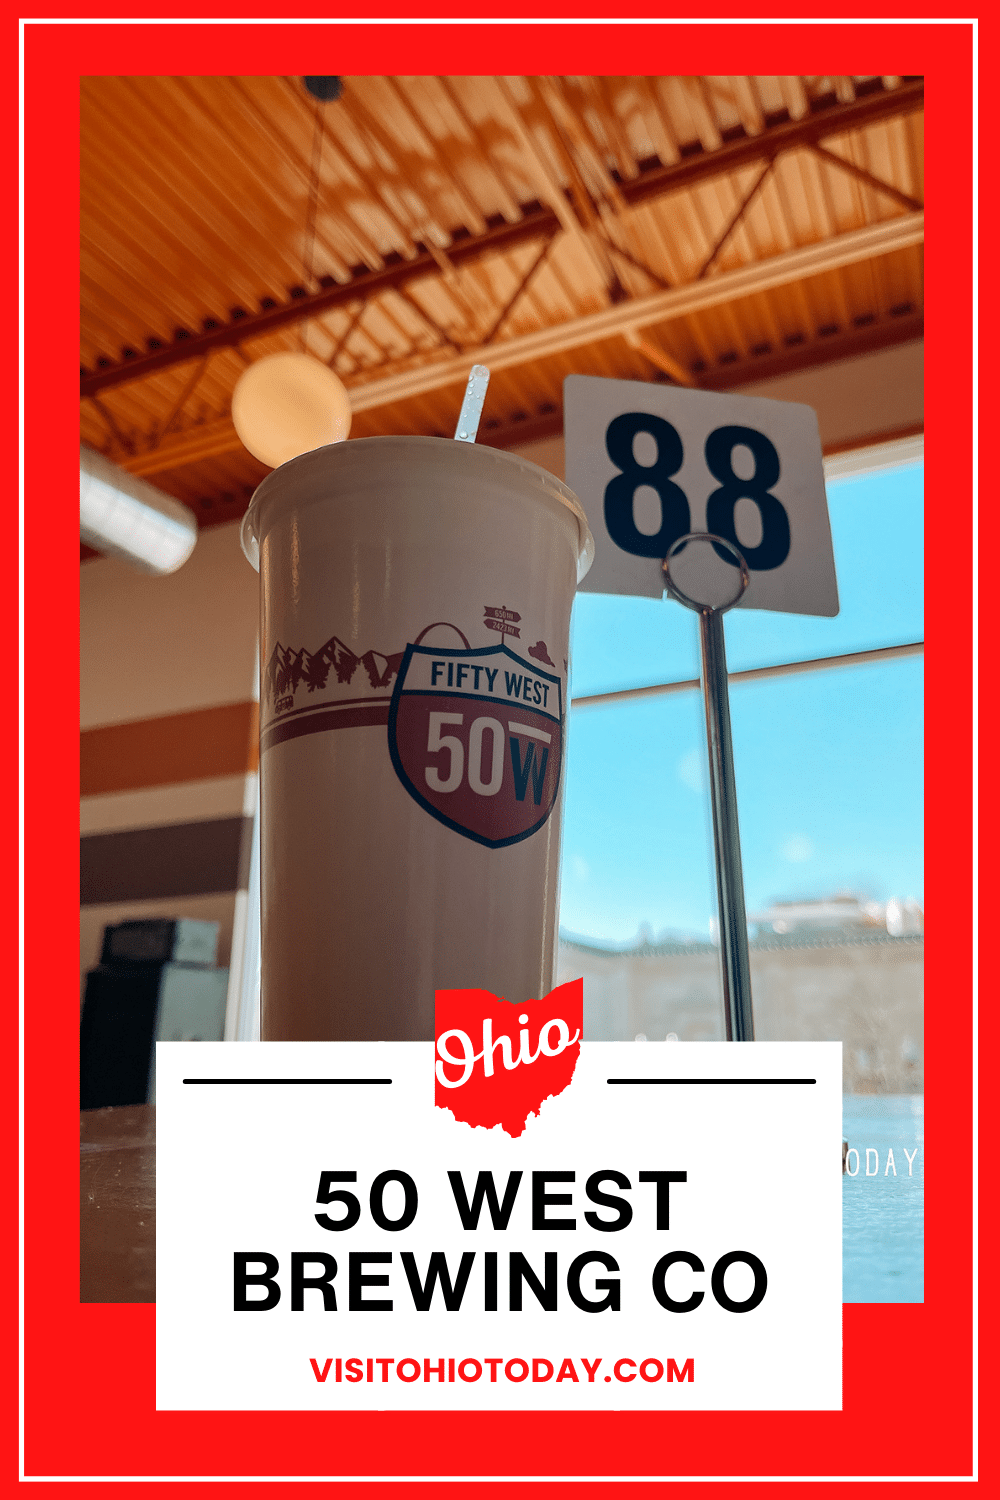 50 West Brewing Company is a burger bar and beer garden designed for families with restaurants in both Chillicothe and Cincinnati.